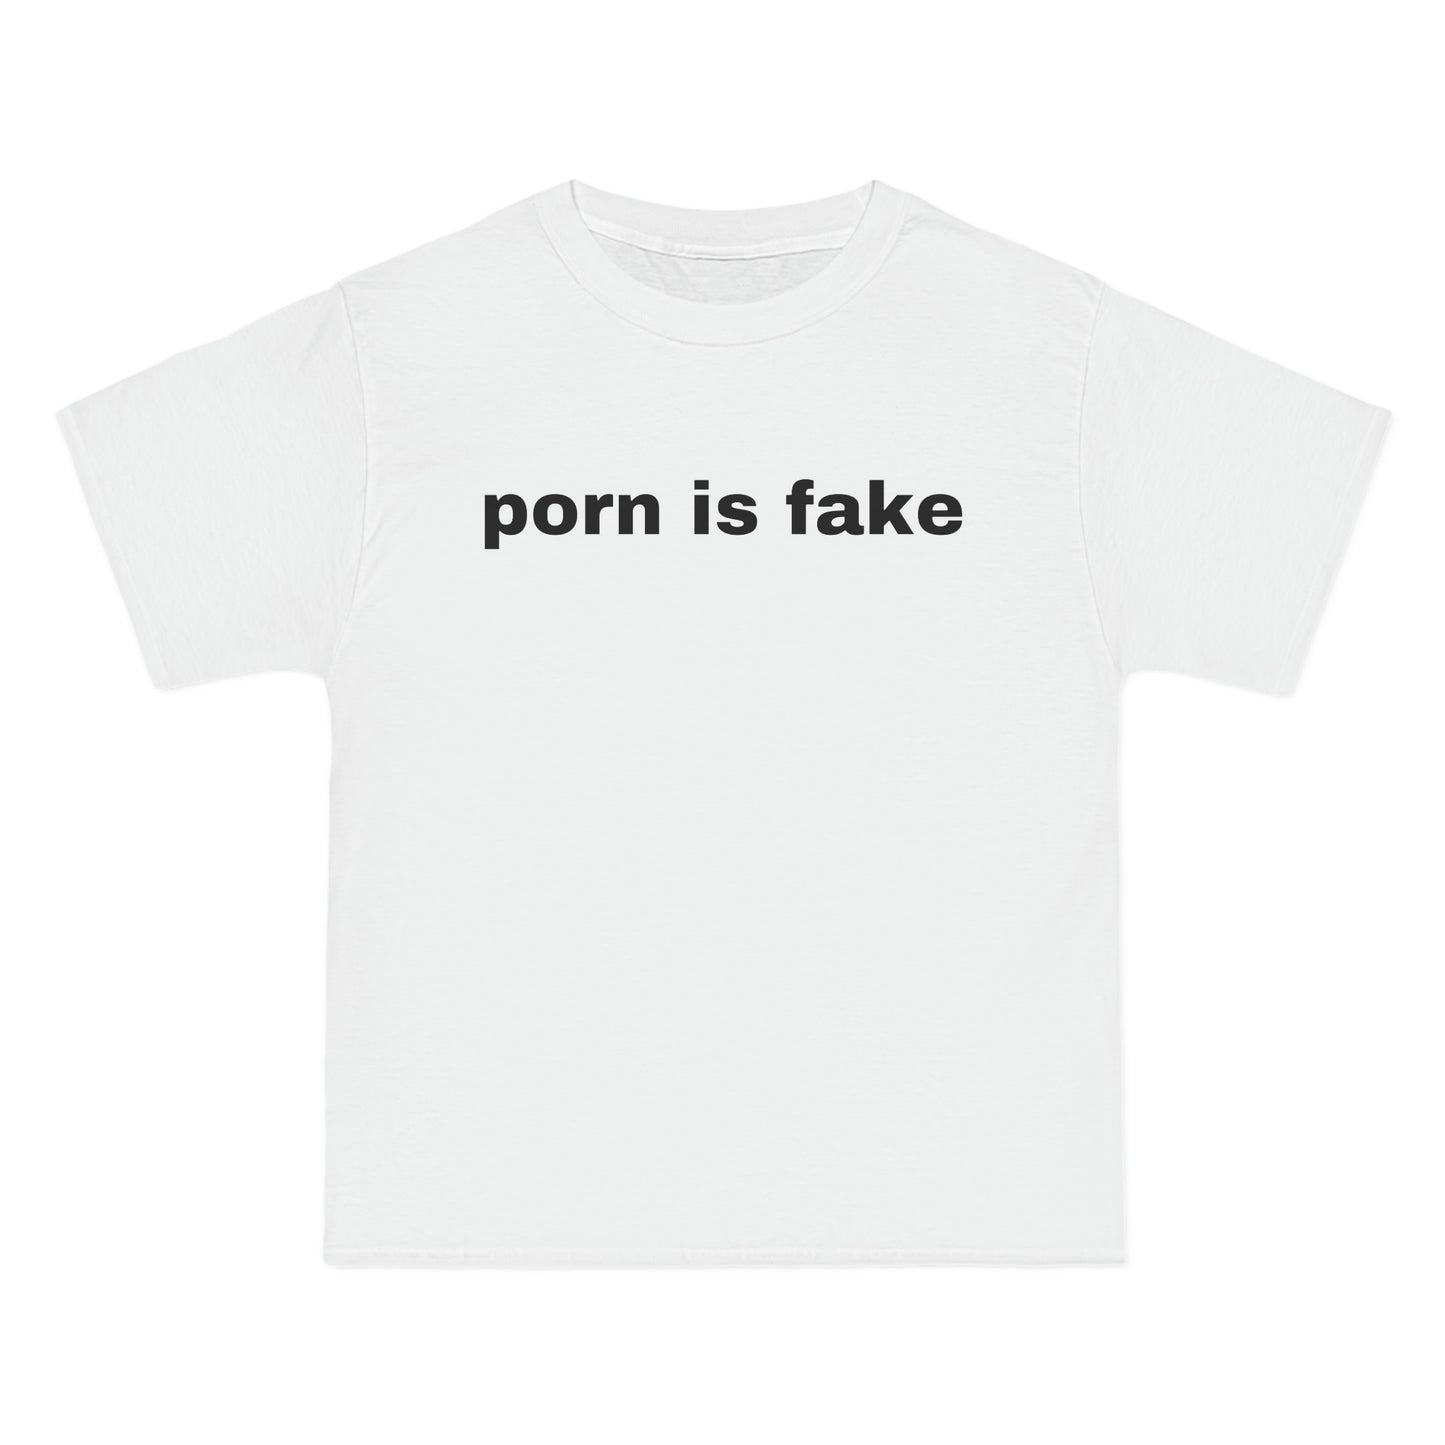 porn is fake Tee